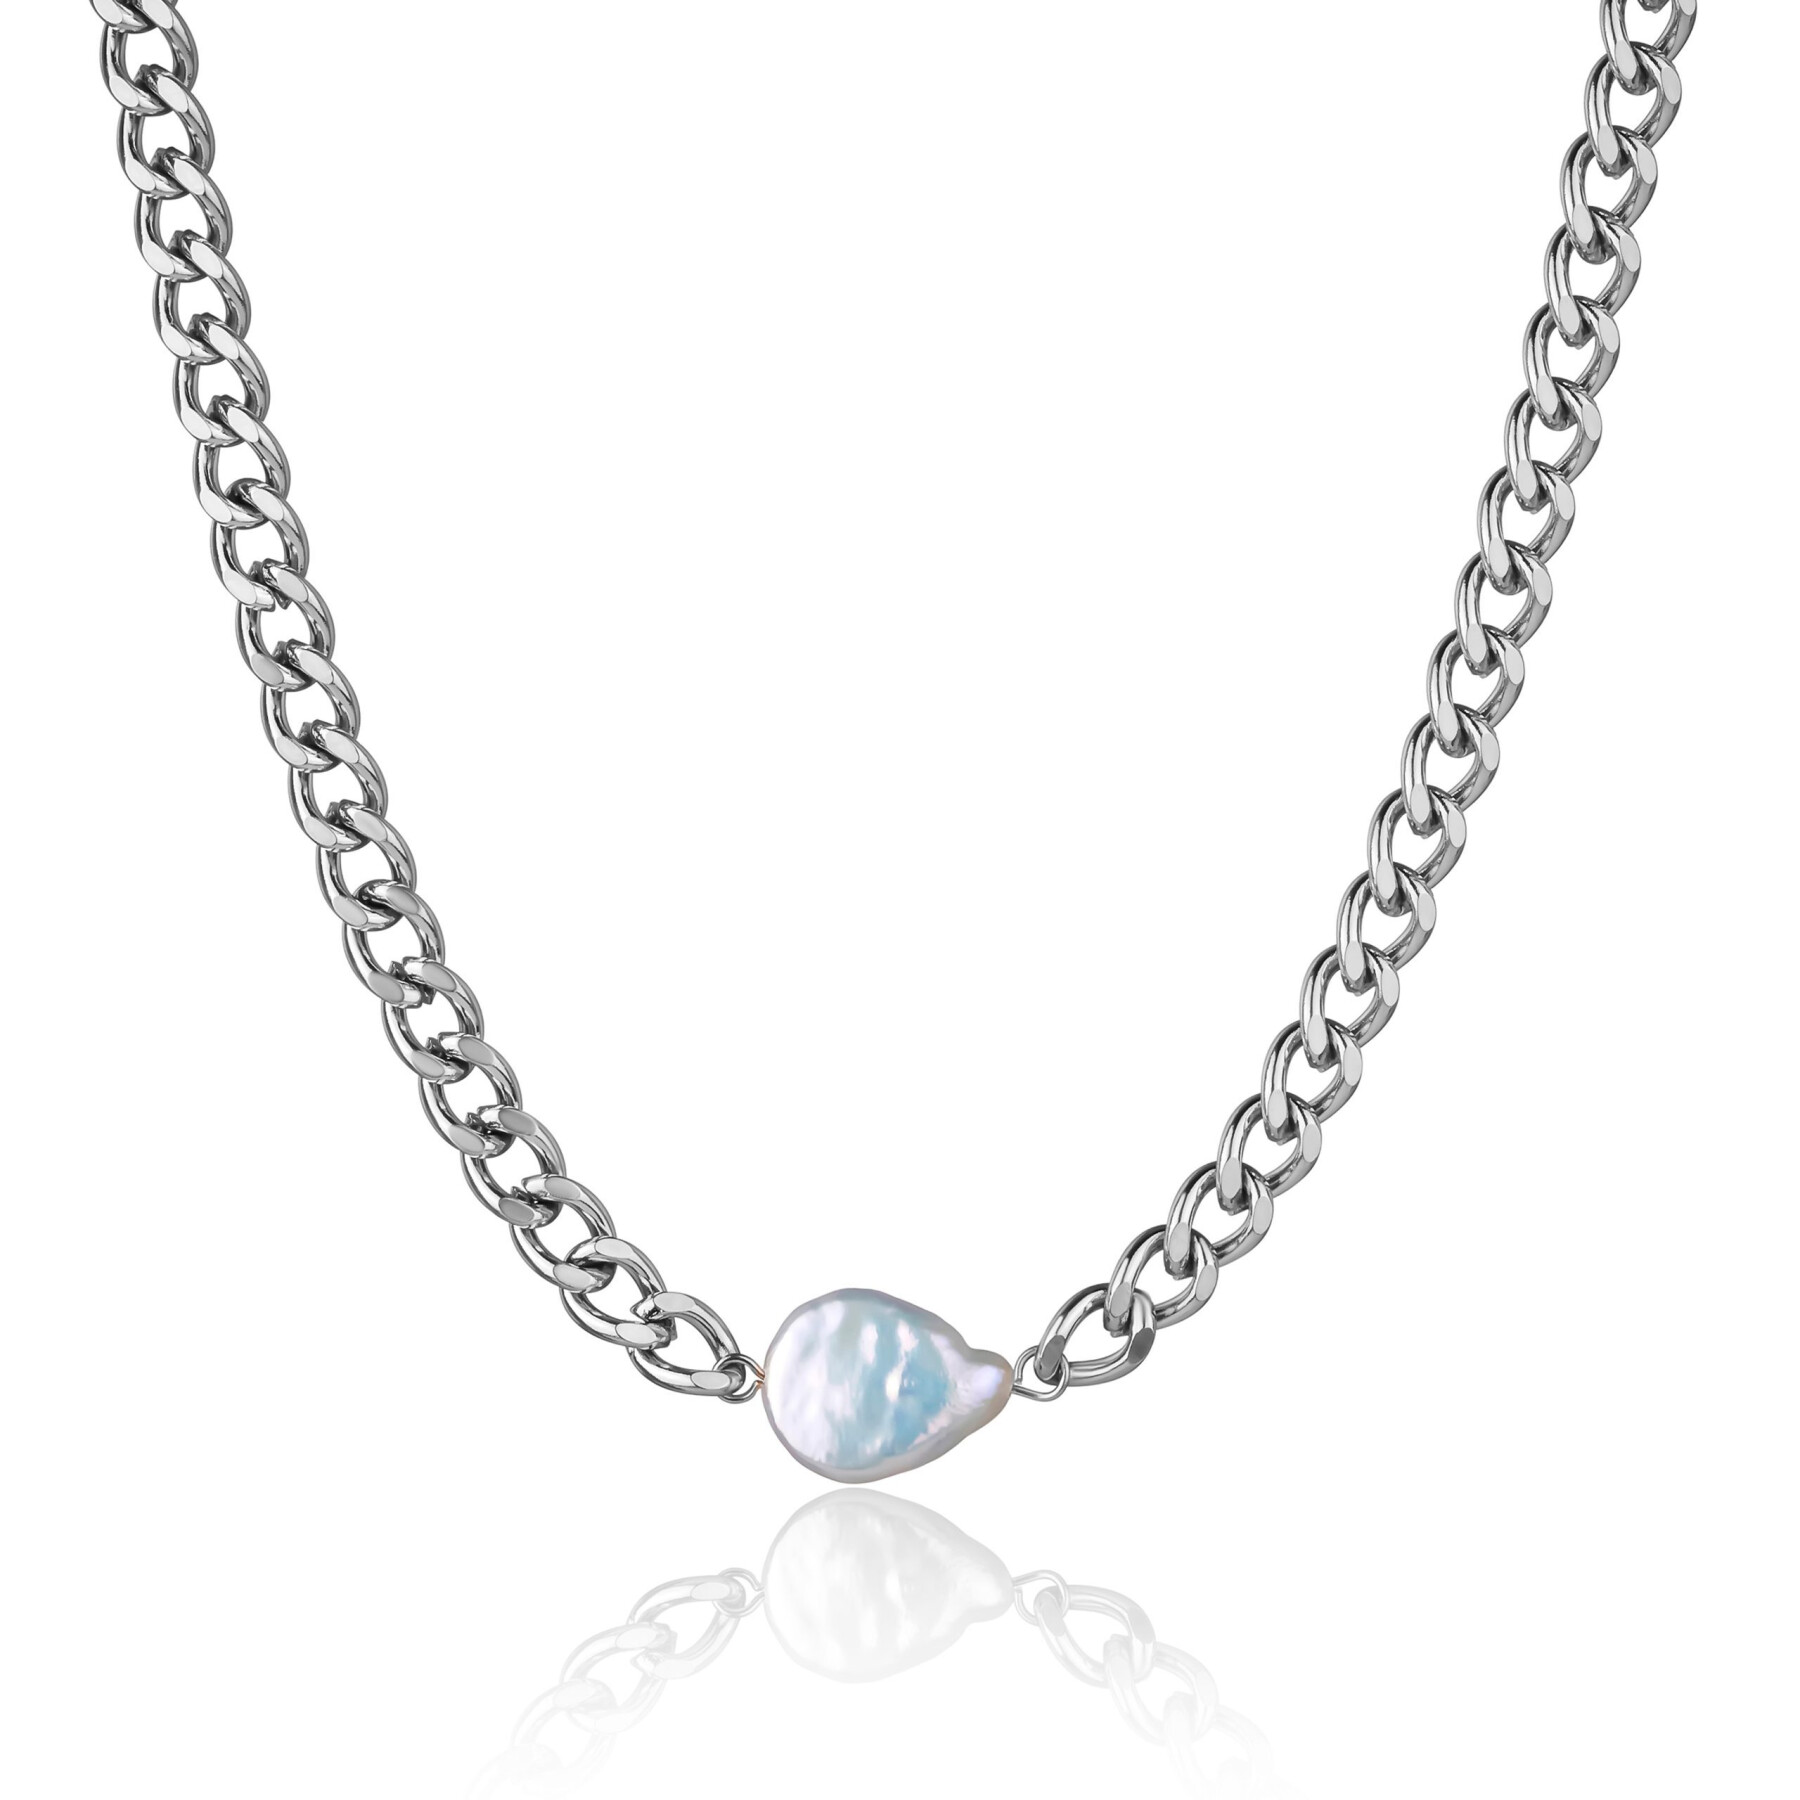 Women's necklace Isabella Ford Mia